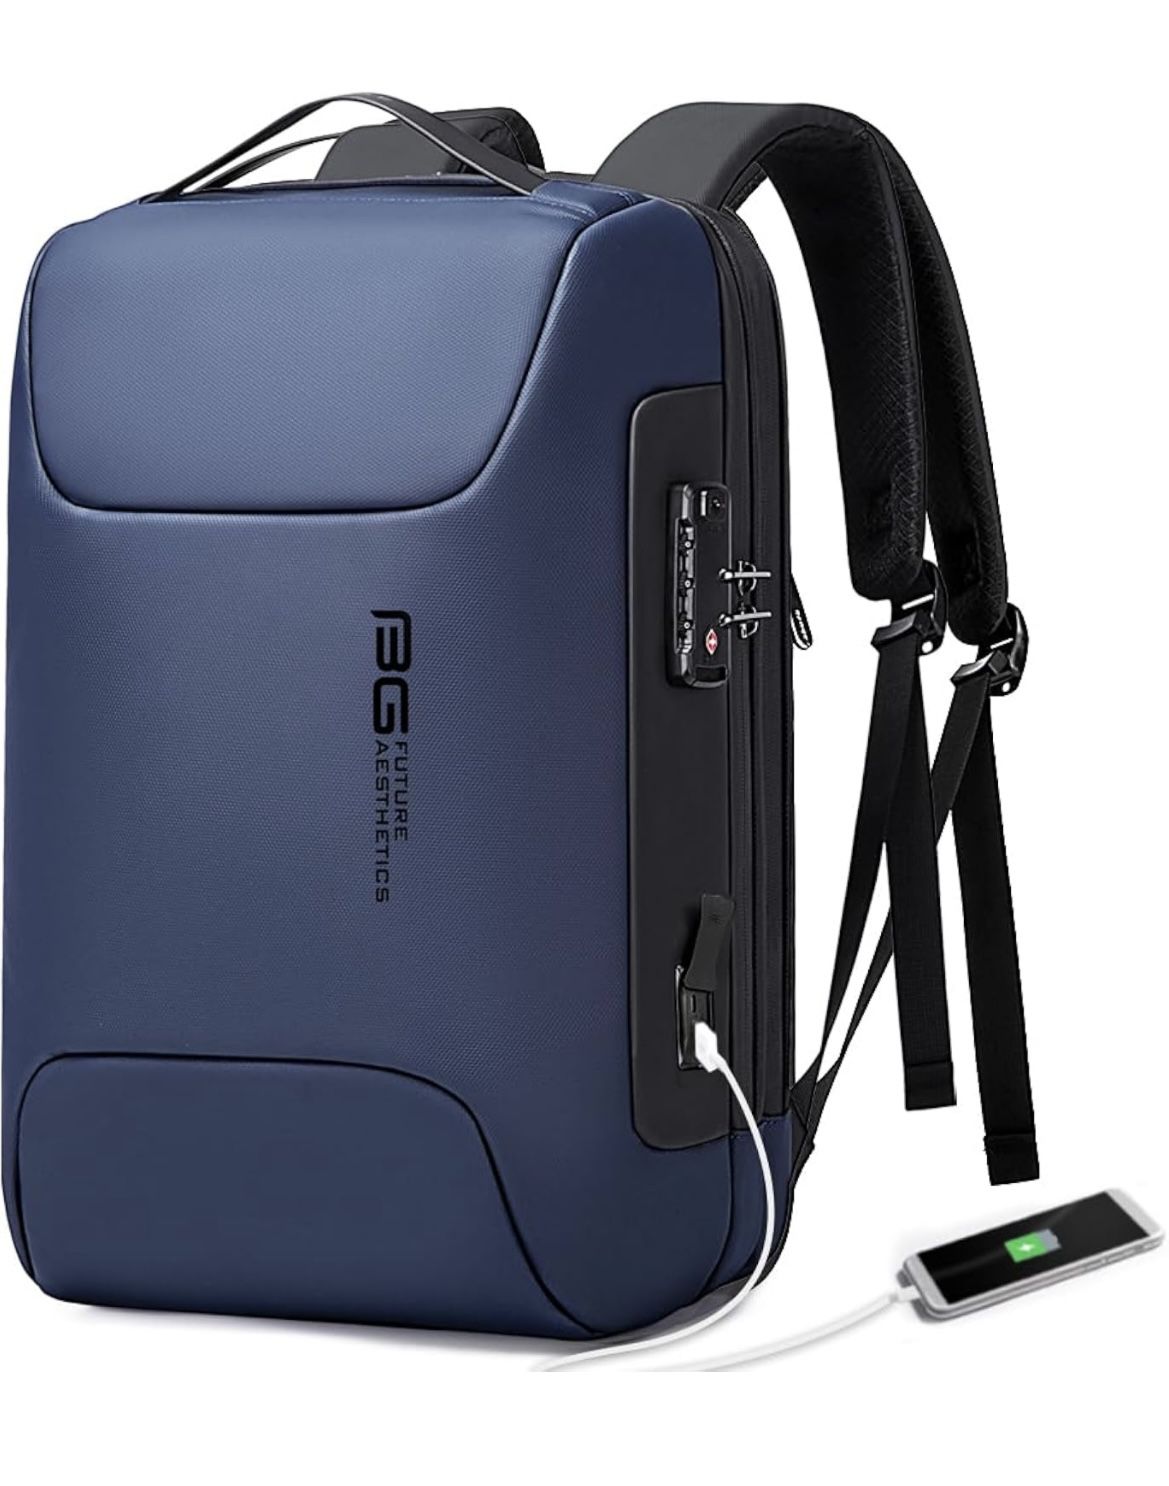 BANGE Anti Theft Business Backpack Fits 15.6 Inch Laptop,Lock Backpack with USB3.0 Charging Port for Office Work,Slim Laptop Backpack for Men and Wome